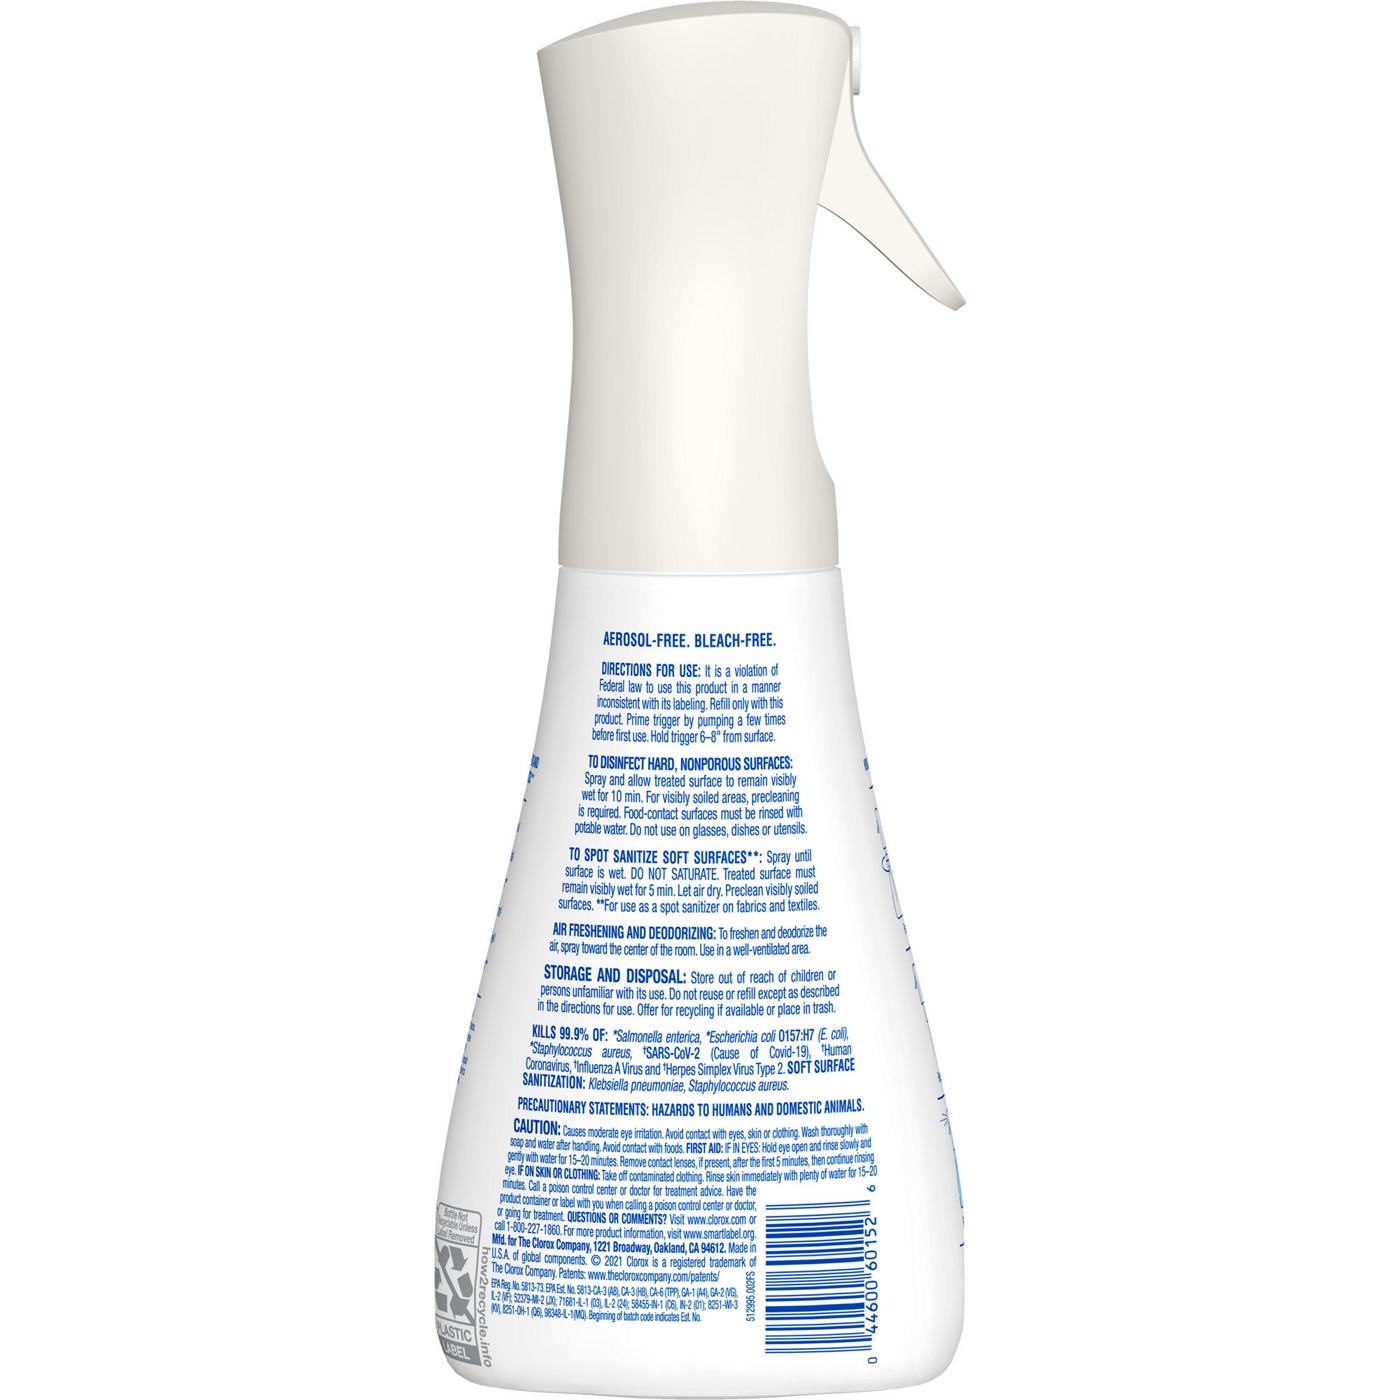 Clorox Eucalyptus Peppermint Multi-Surface Disinfecting Mist; image 16 of 19